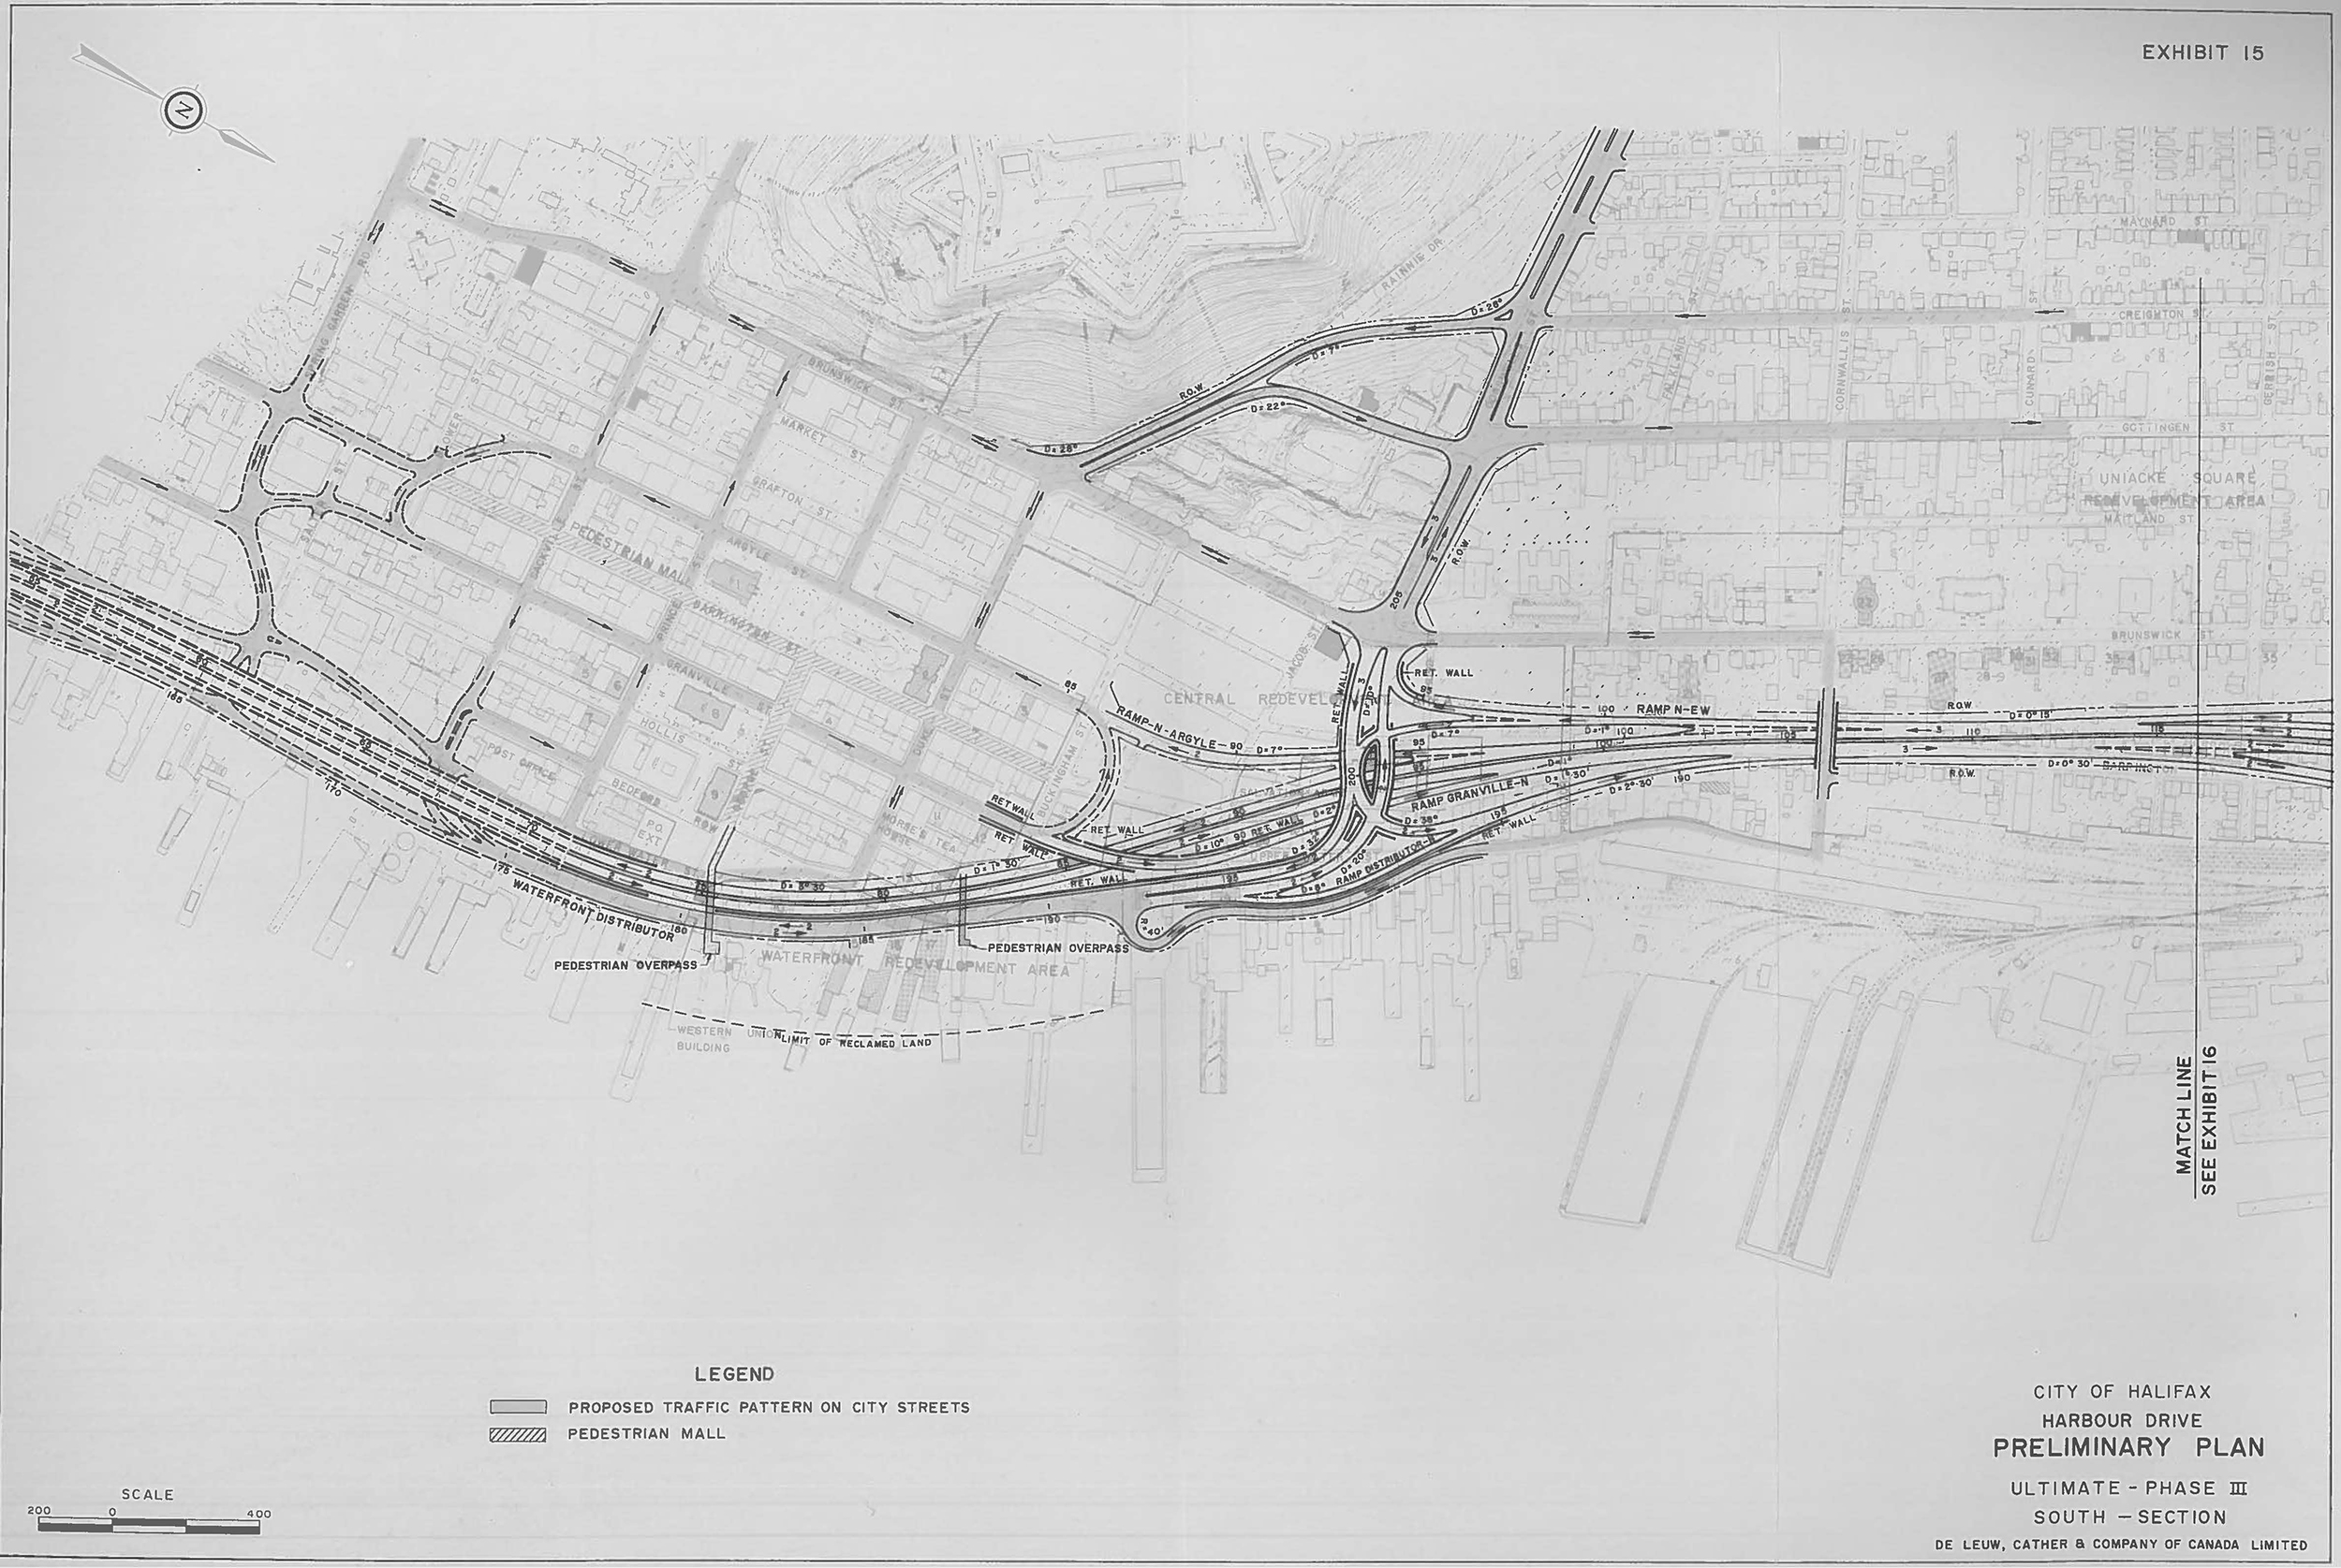 Map showing the downtown portion of the Halifax peninsula, with Harbour Drive plan drawn in over waterfront area